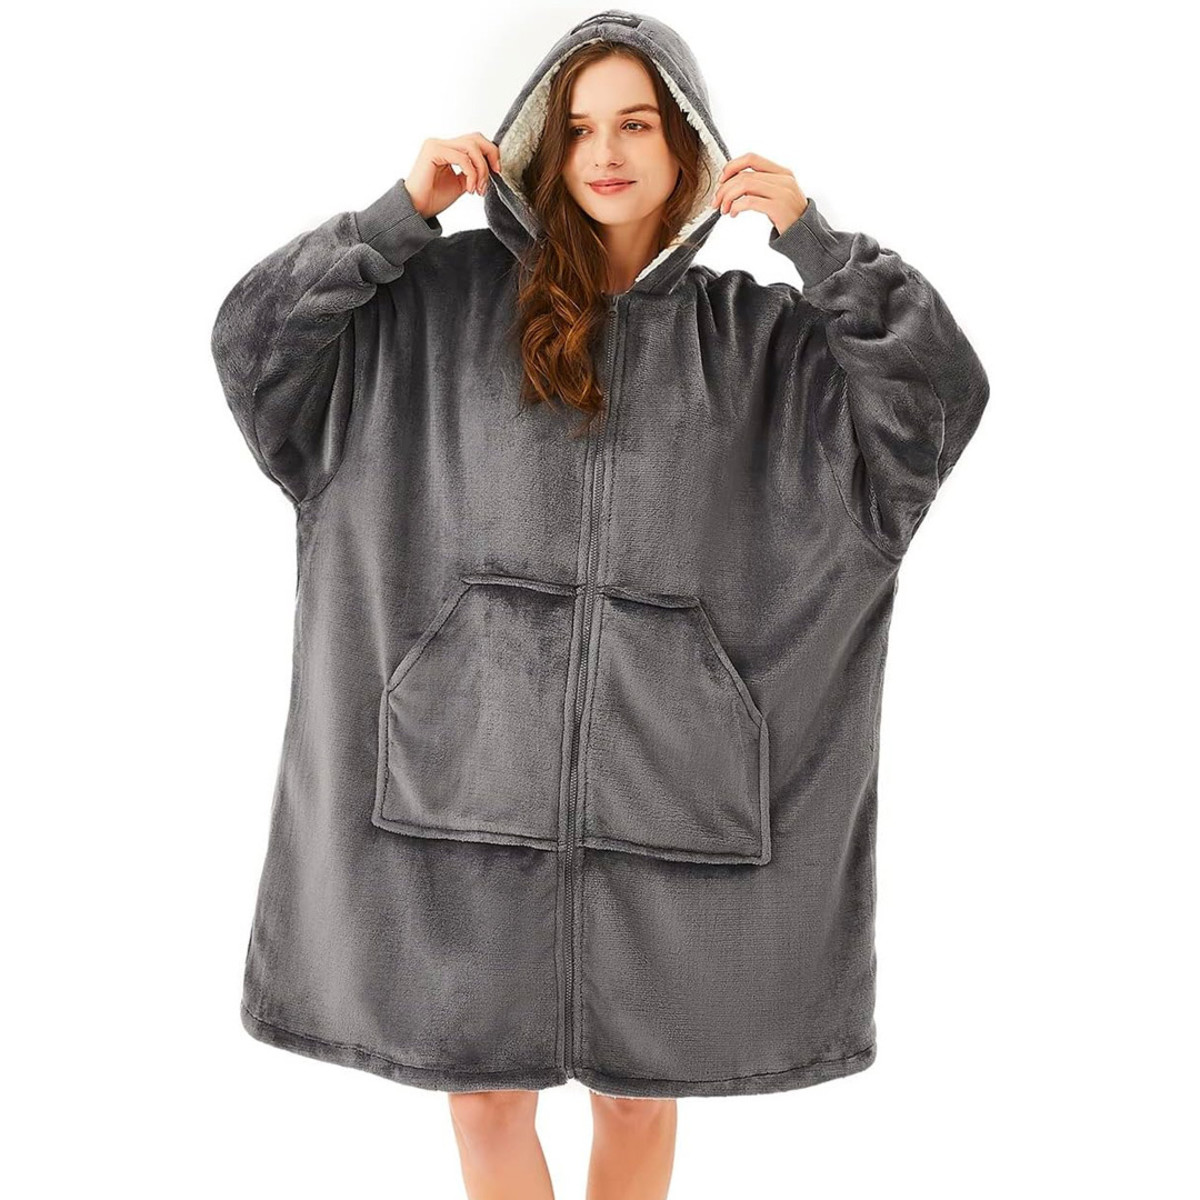 A top-selling blanket hoodie is on double sale for $17 at Amazon ...